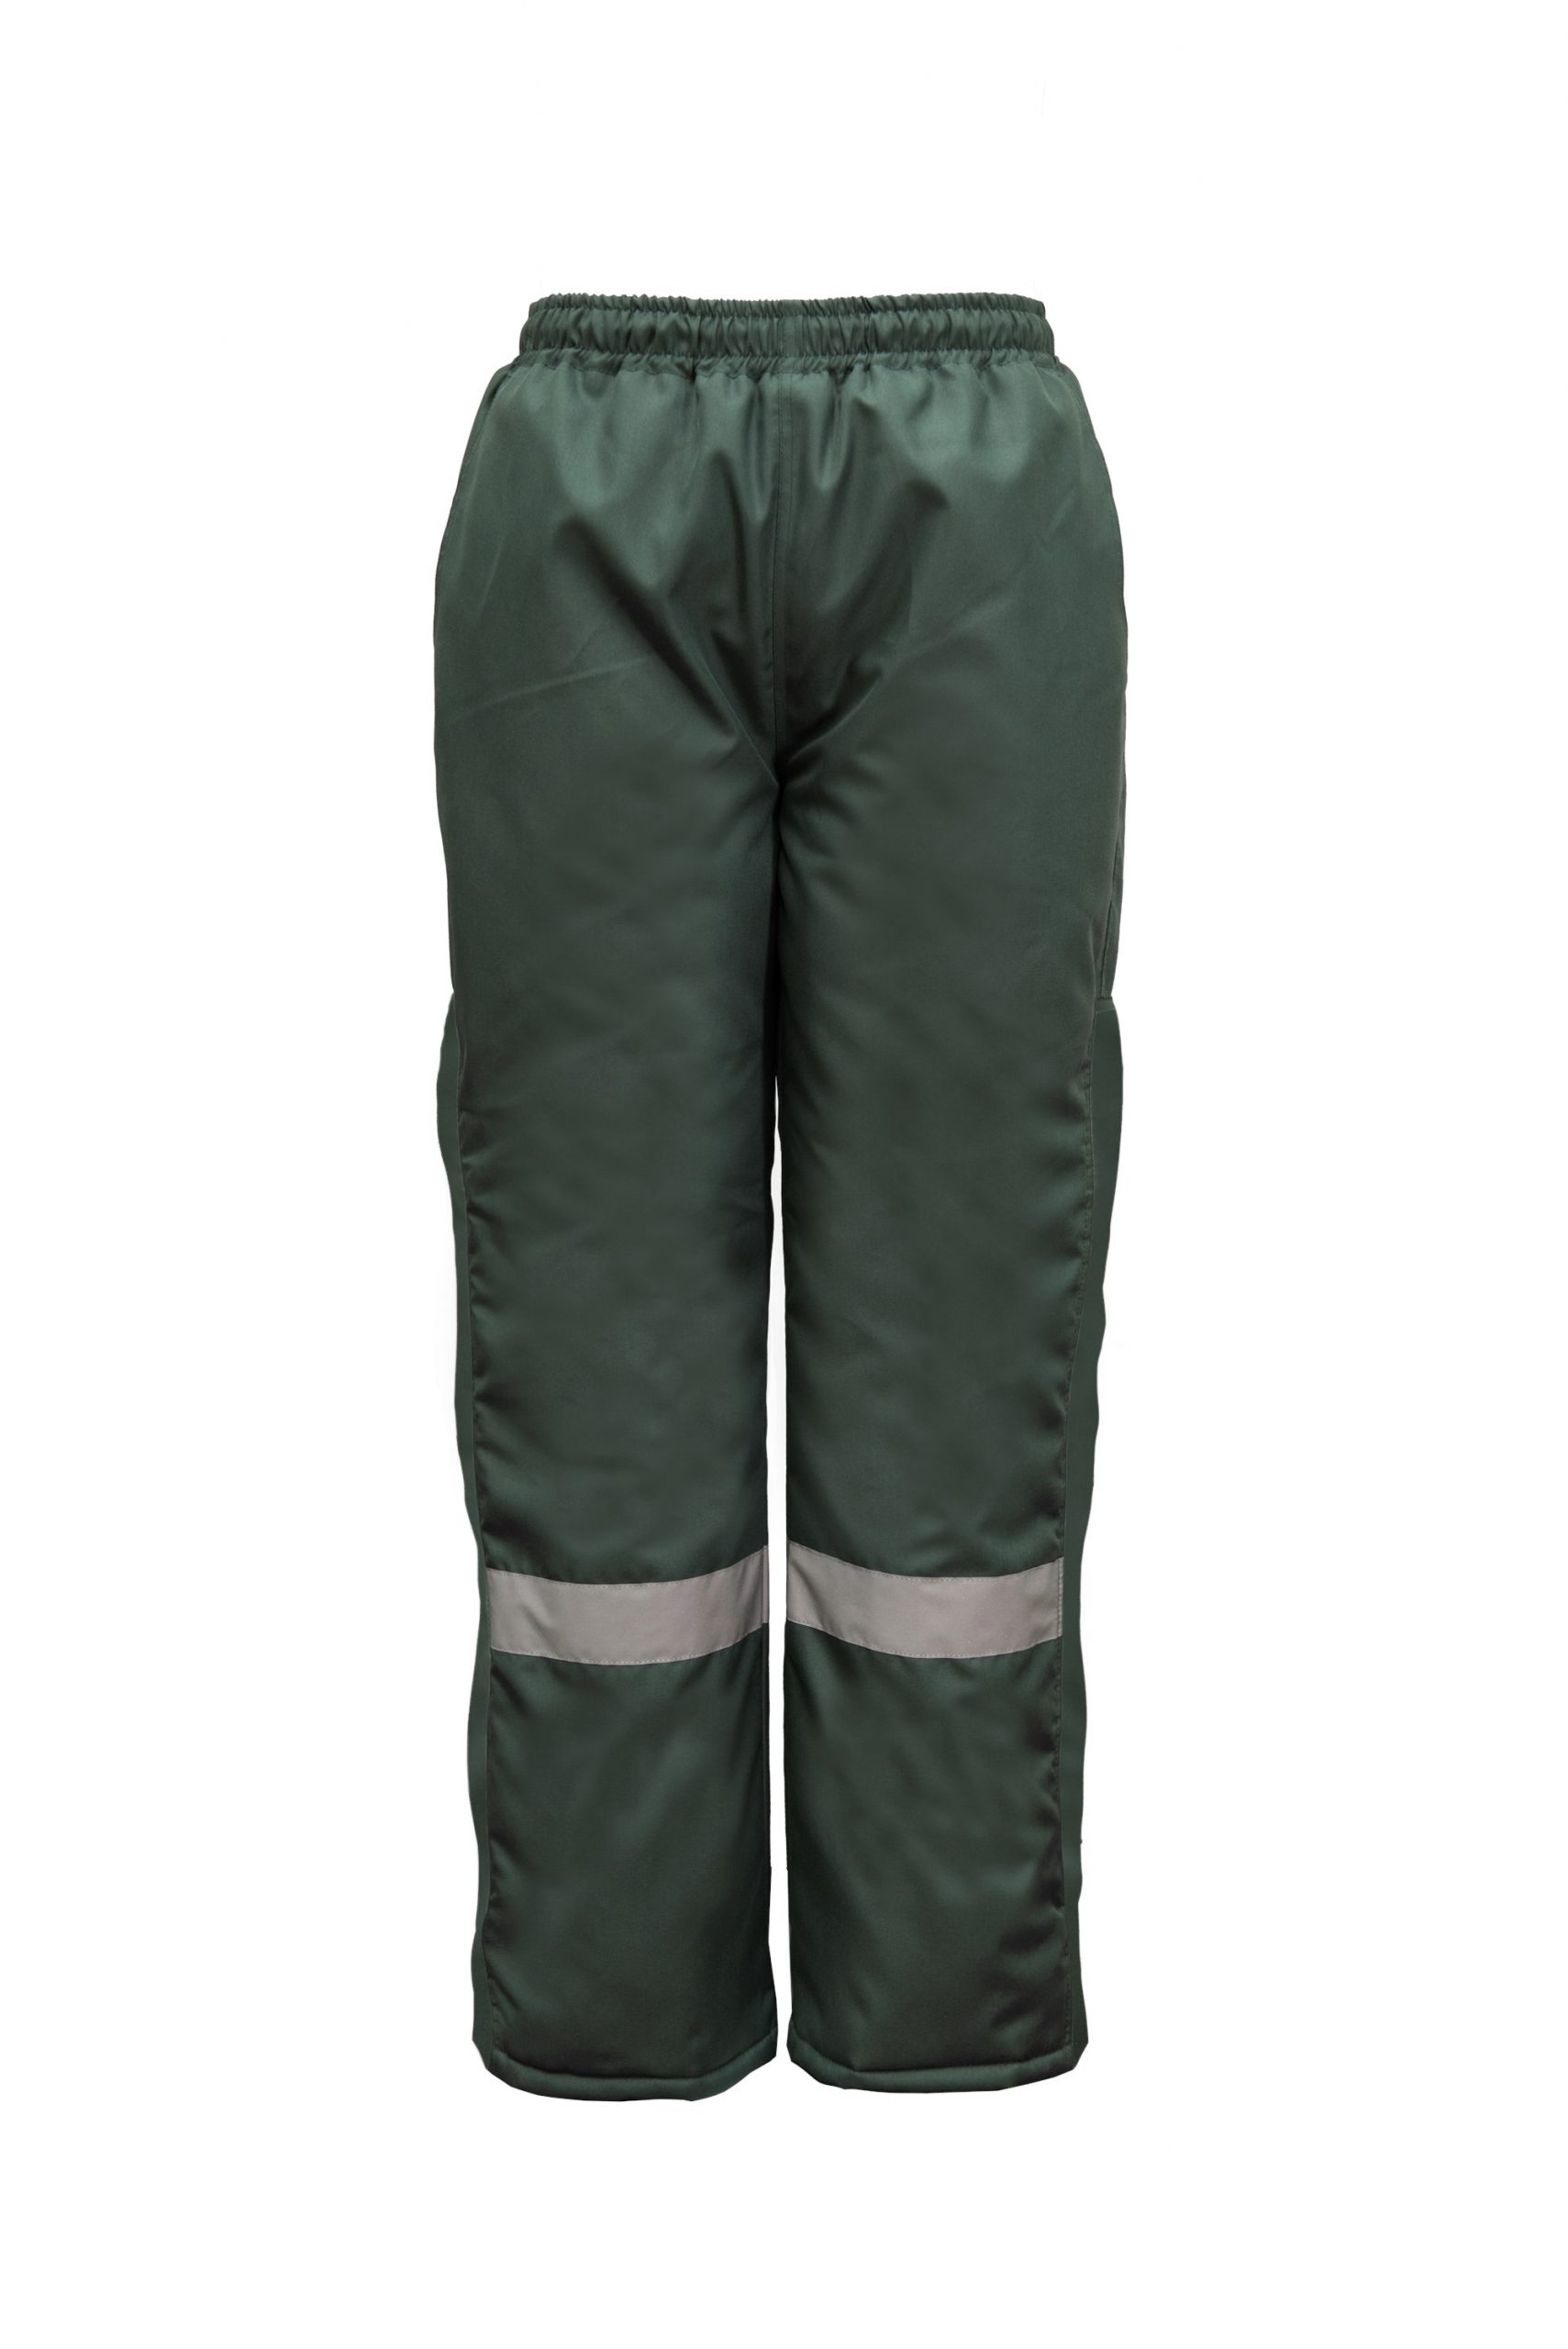 WFP002 - Freezer Pants With Reflective Tape